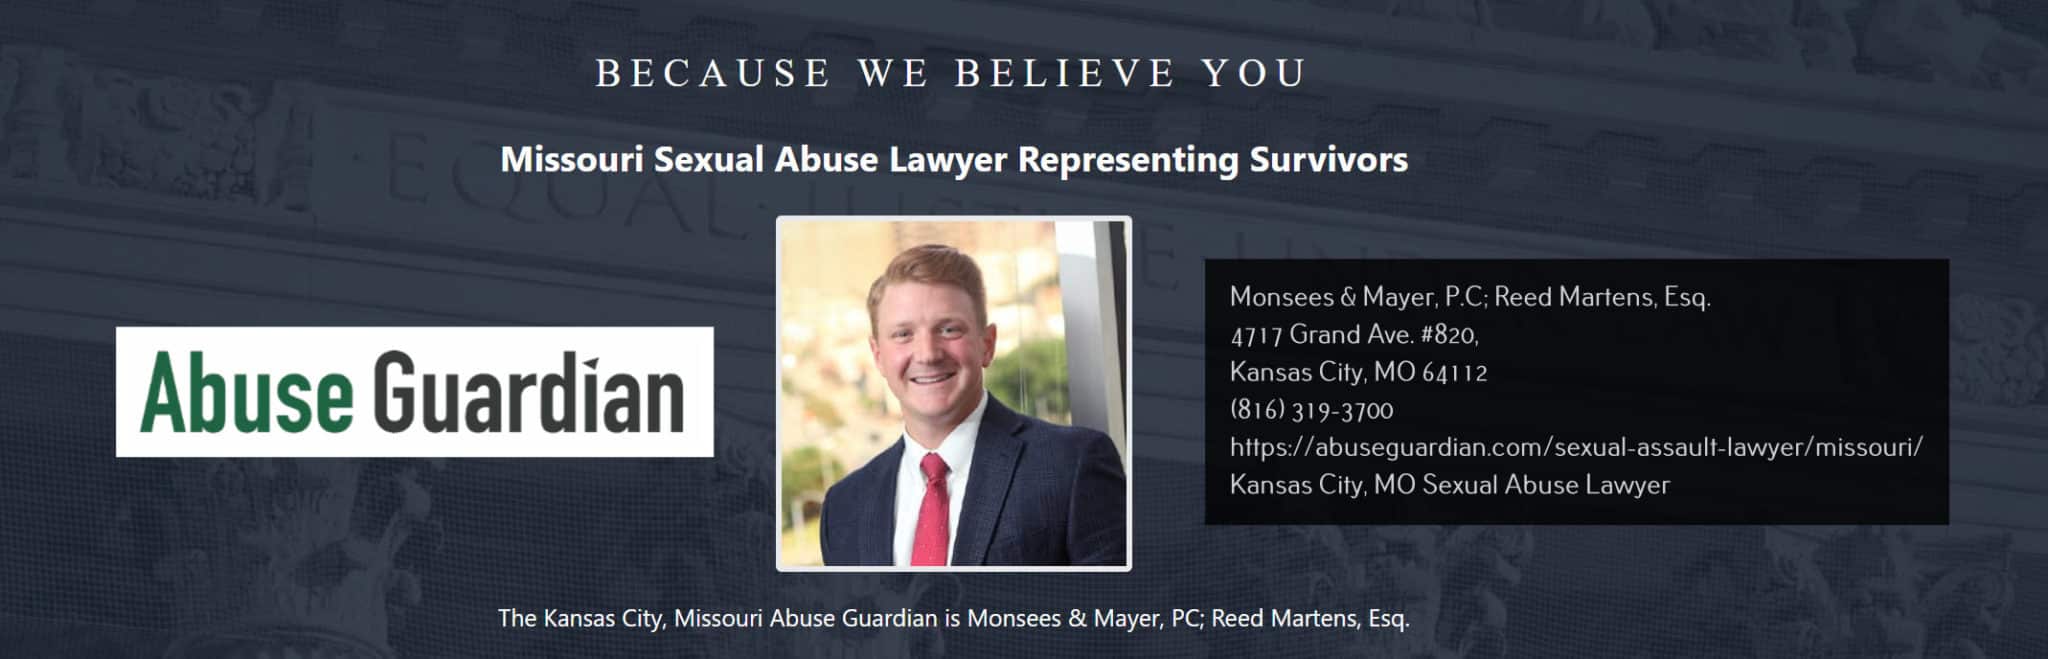 sexual abuse lawyer kansas city monsees & mayer, p.c; reed martens, esq.